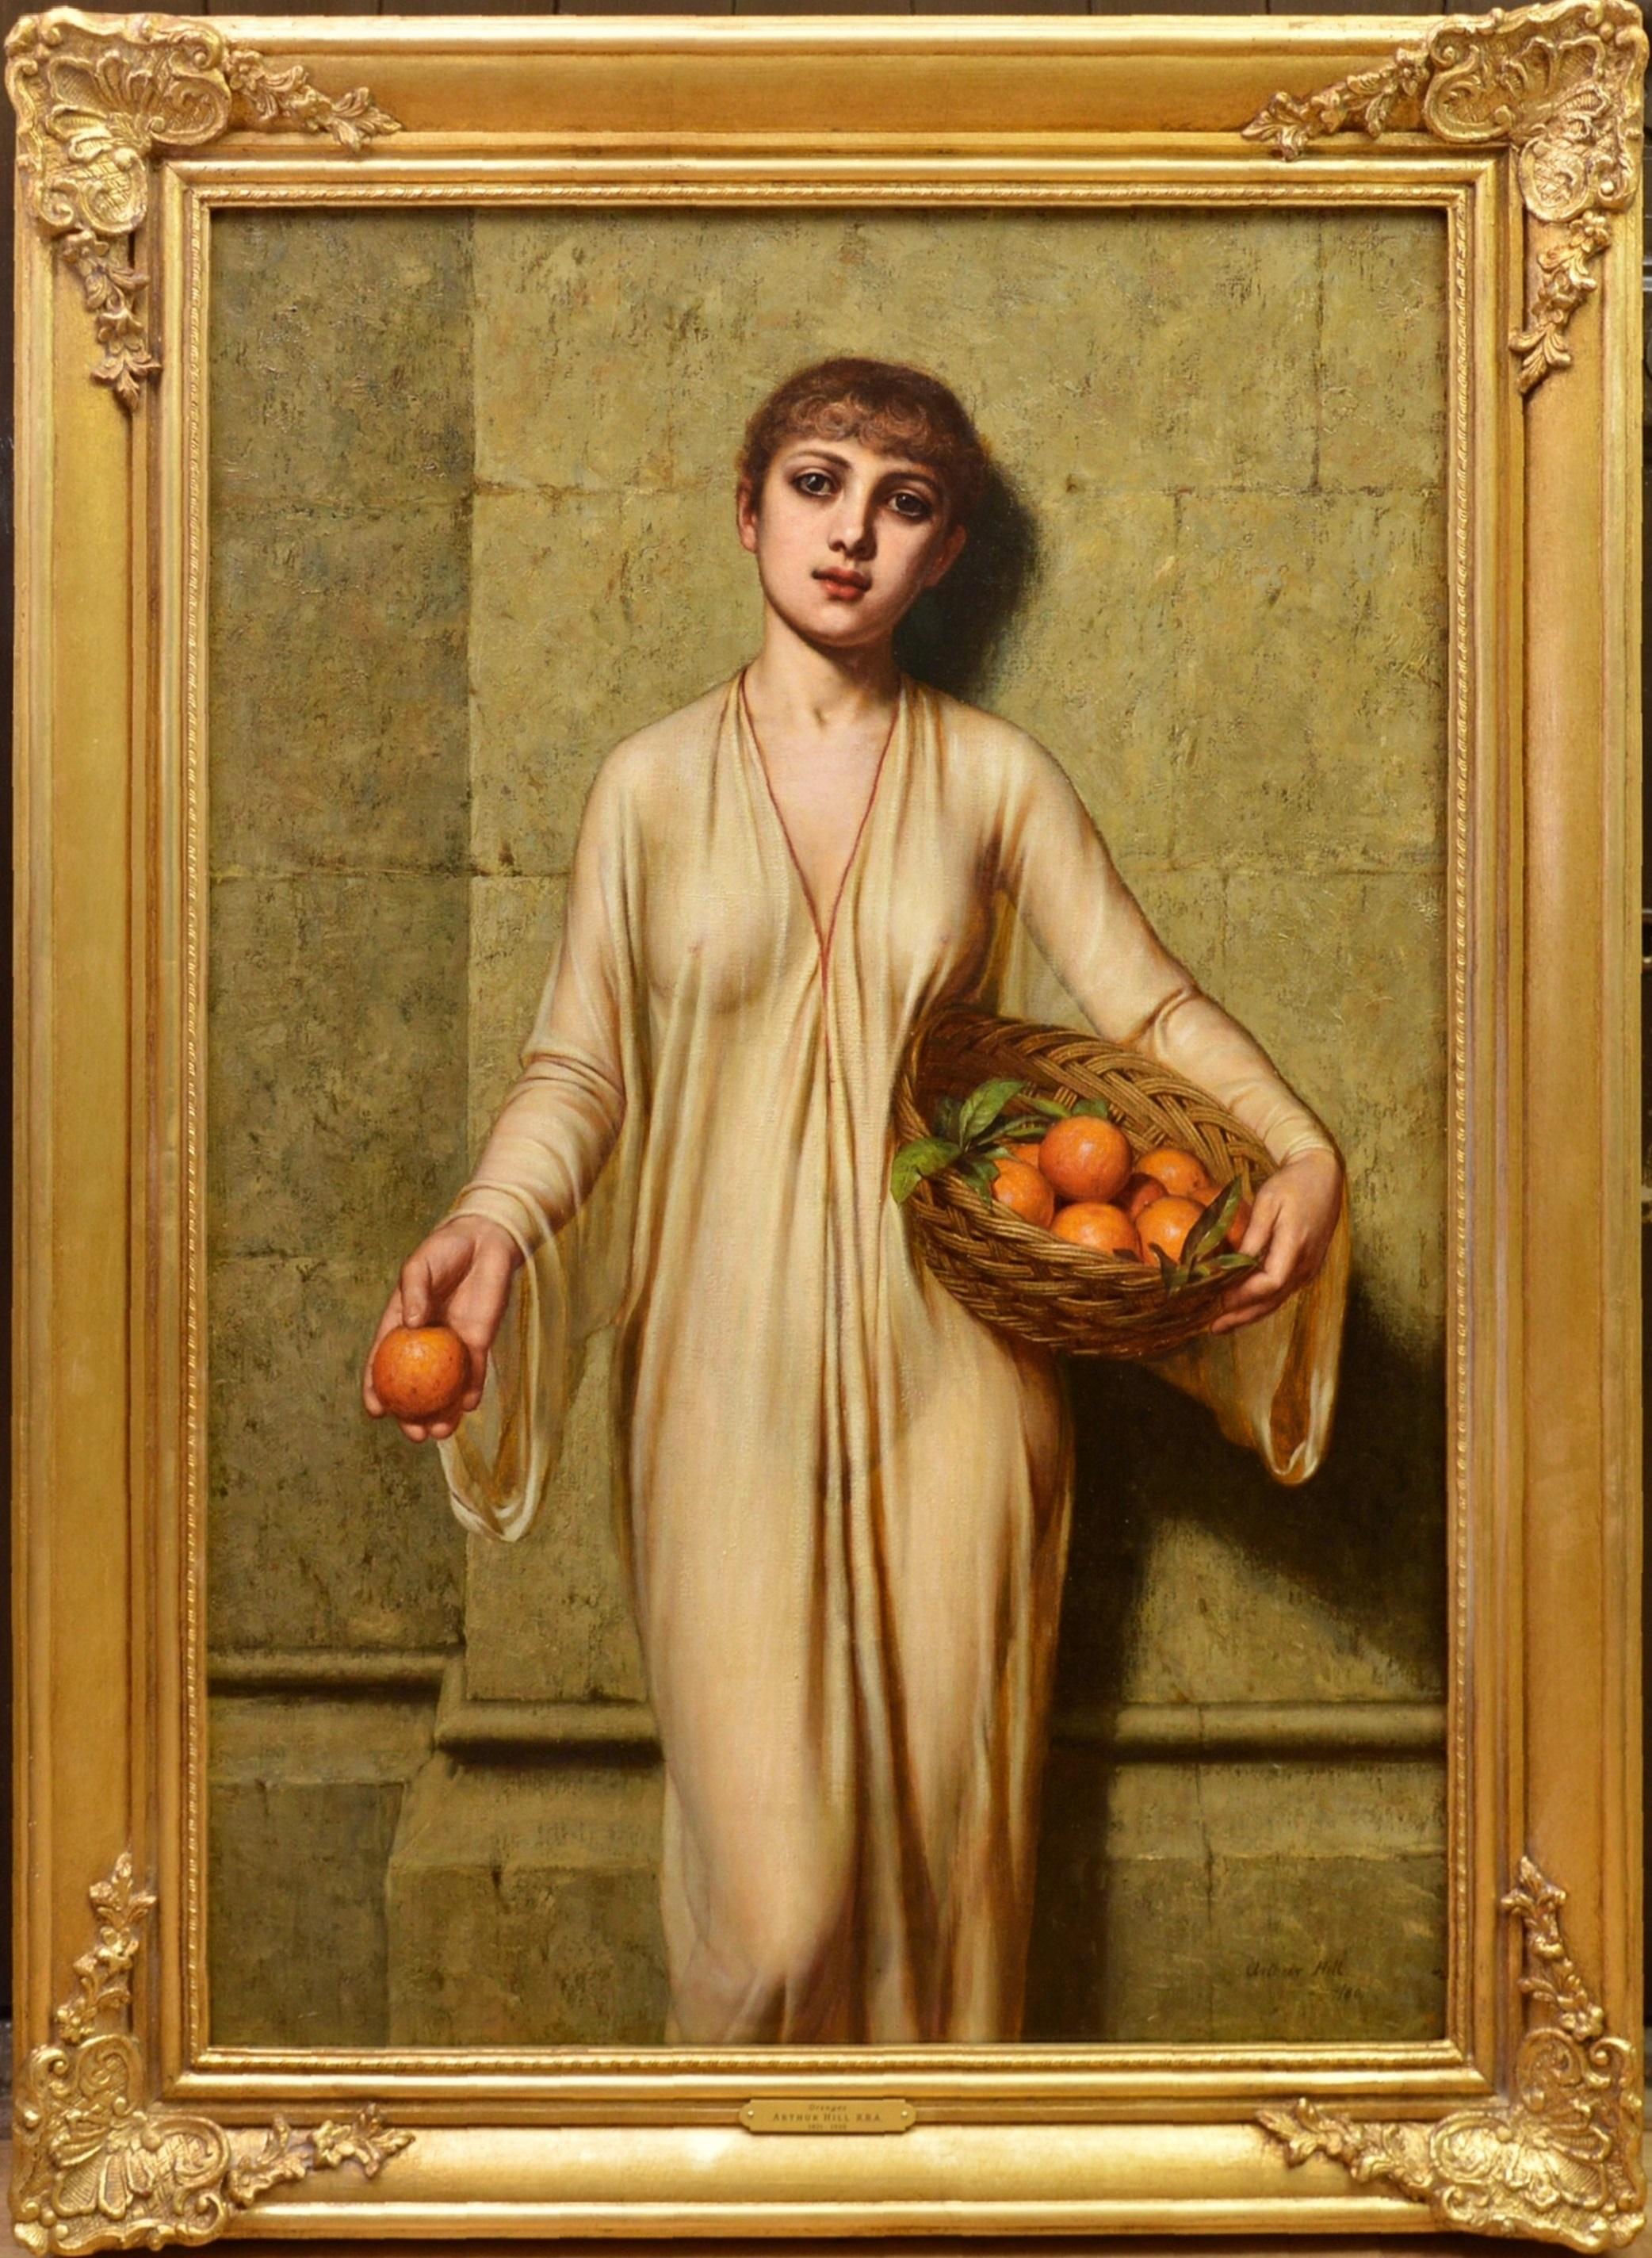 Arthur Hill Nude Painting - Oranges - 19th Century Neoclassical Portrait Oil Painting of Young Roman Girl